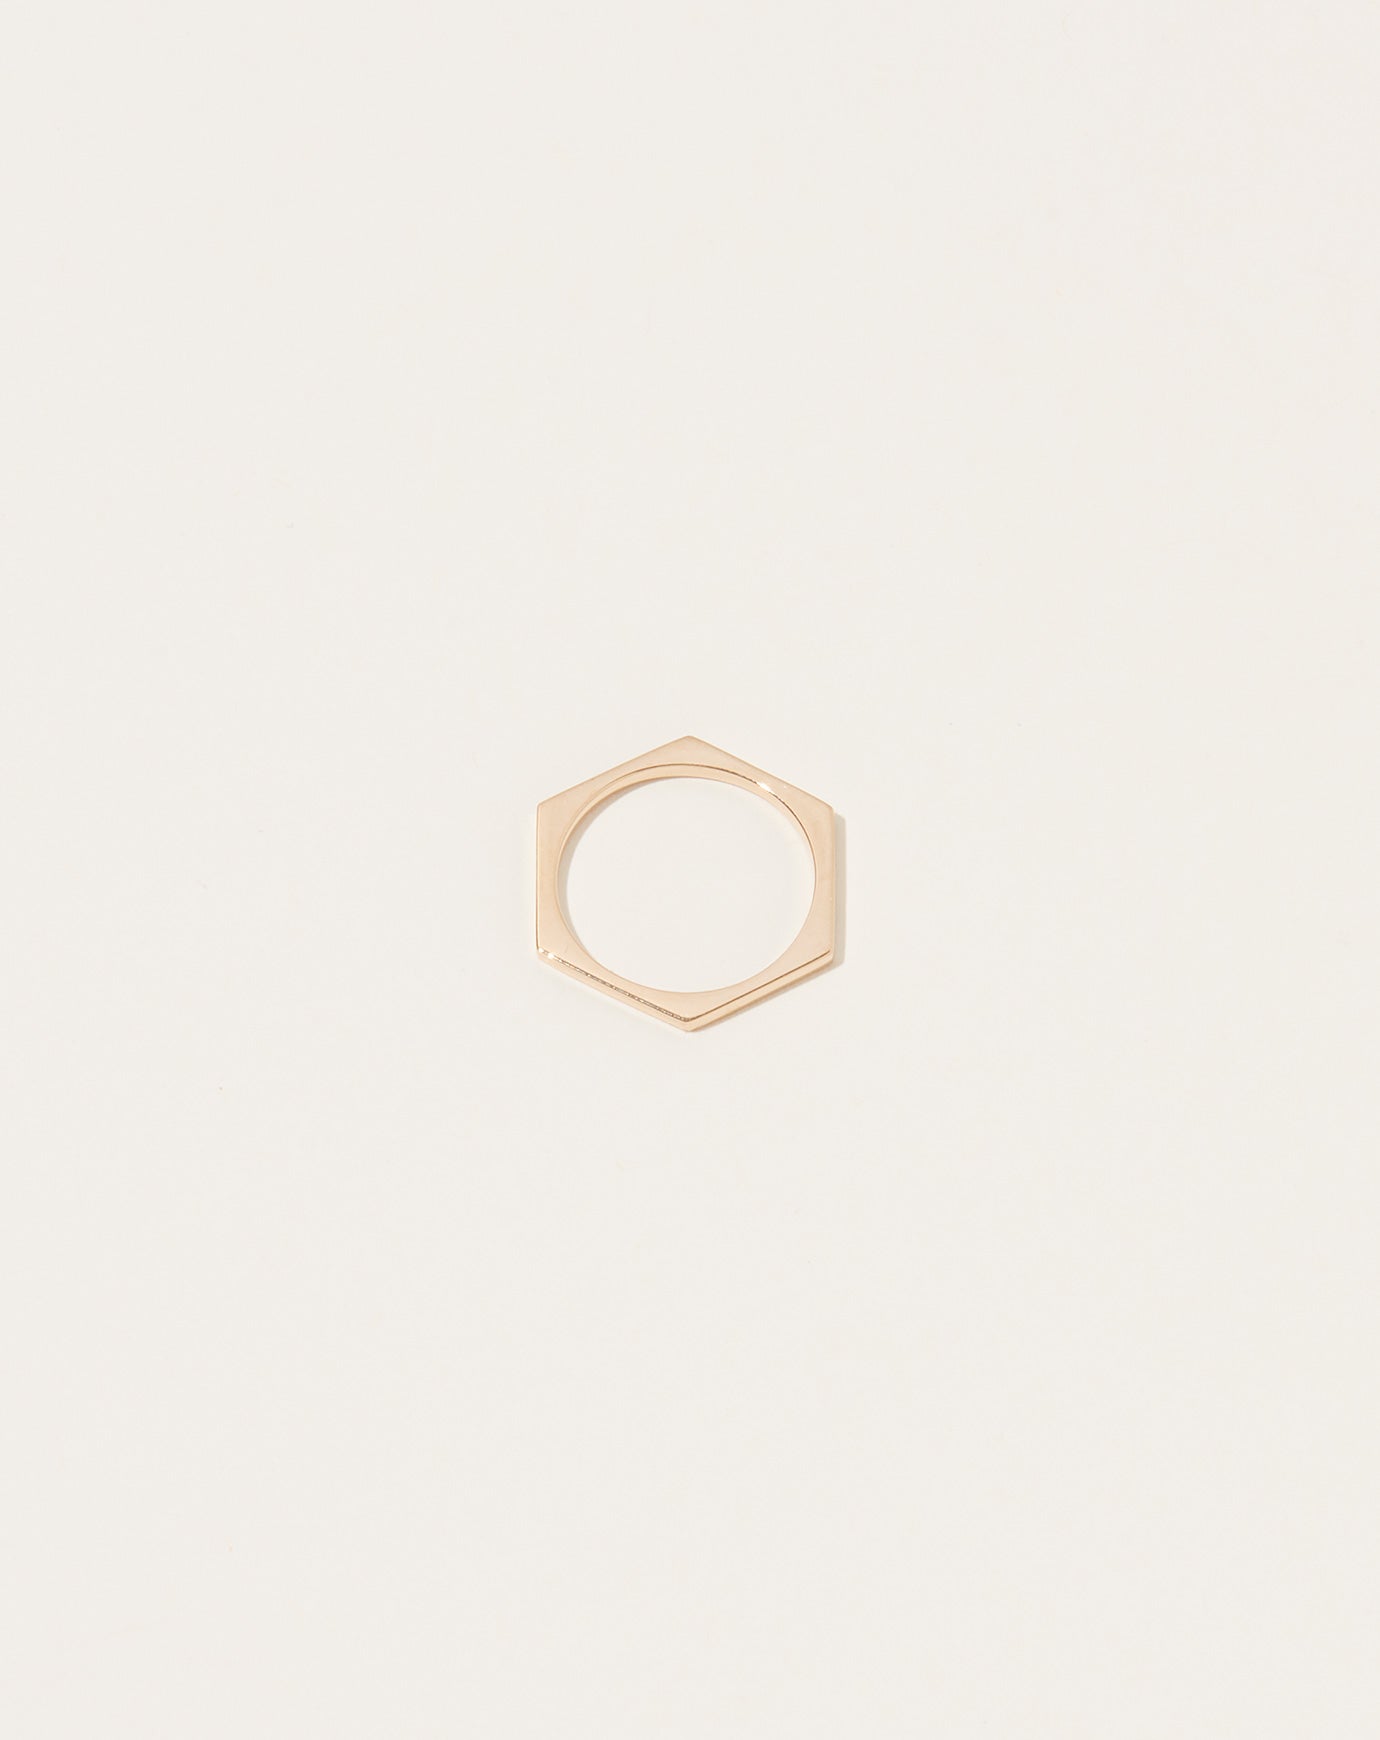 Selin Kent Hex Ring in 14k Yellow Gold